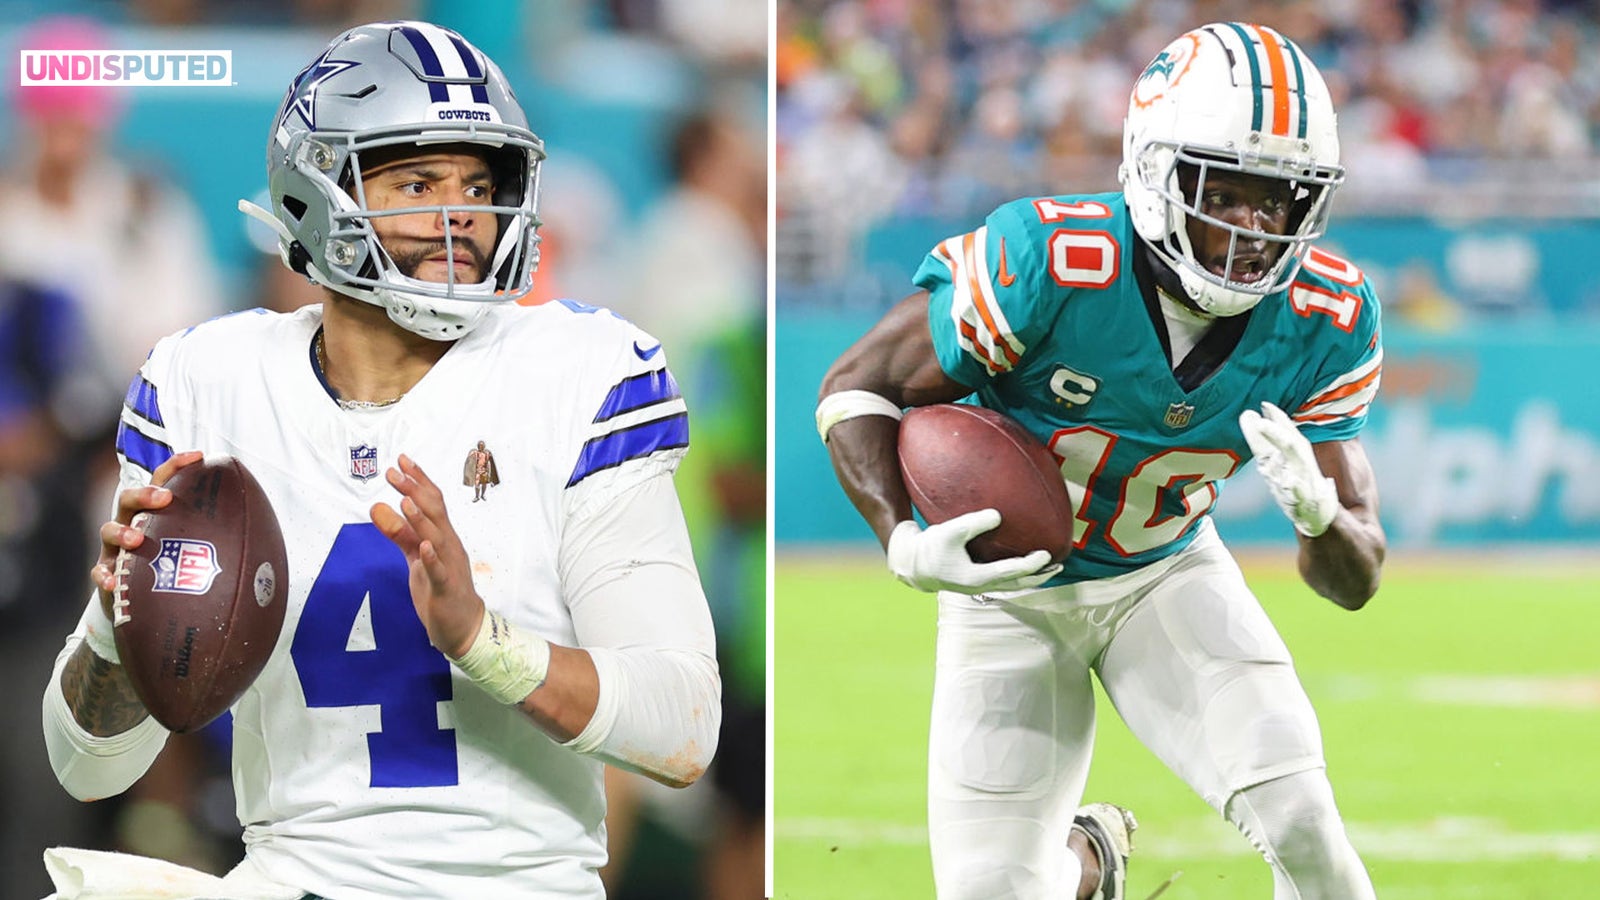 Cowboys fall to Dolphins 22-20 on walk-off FG, drop to 3-5 on the road | Undisputed